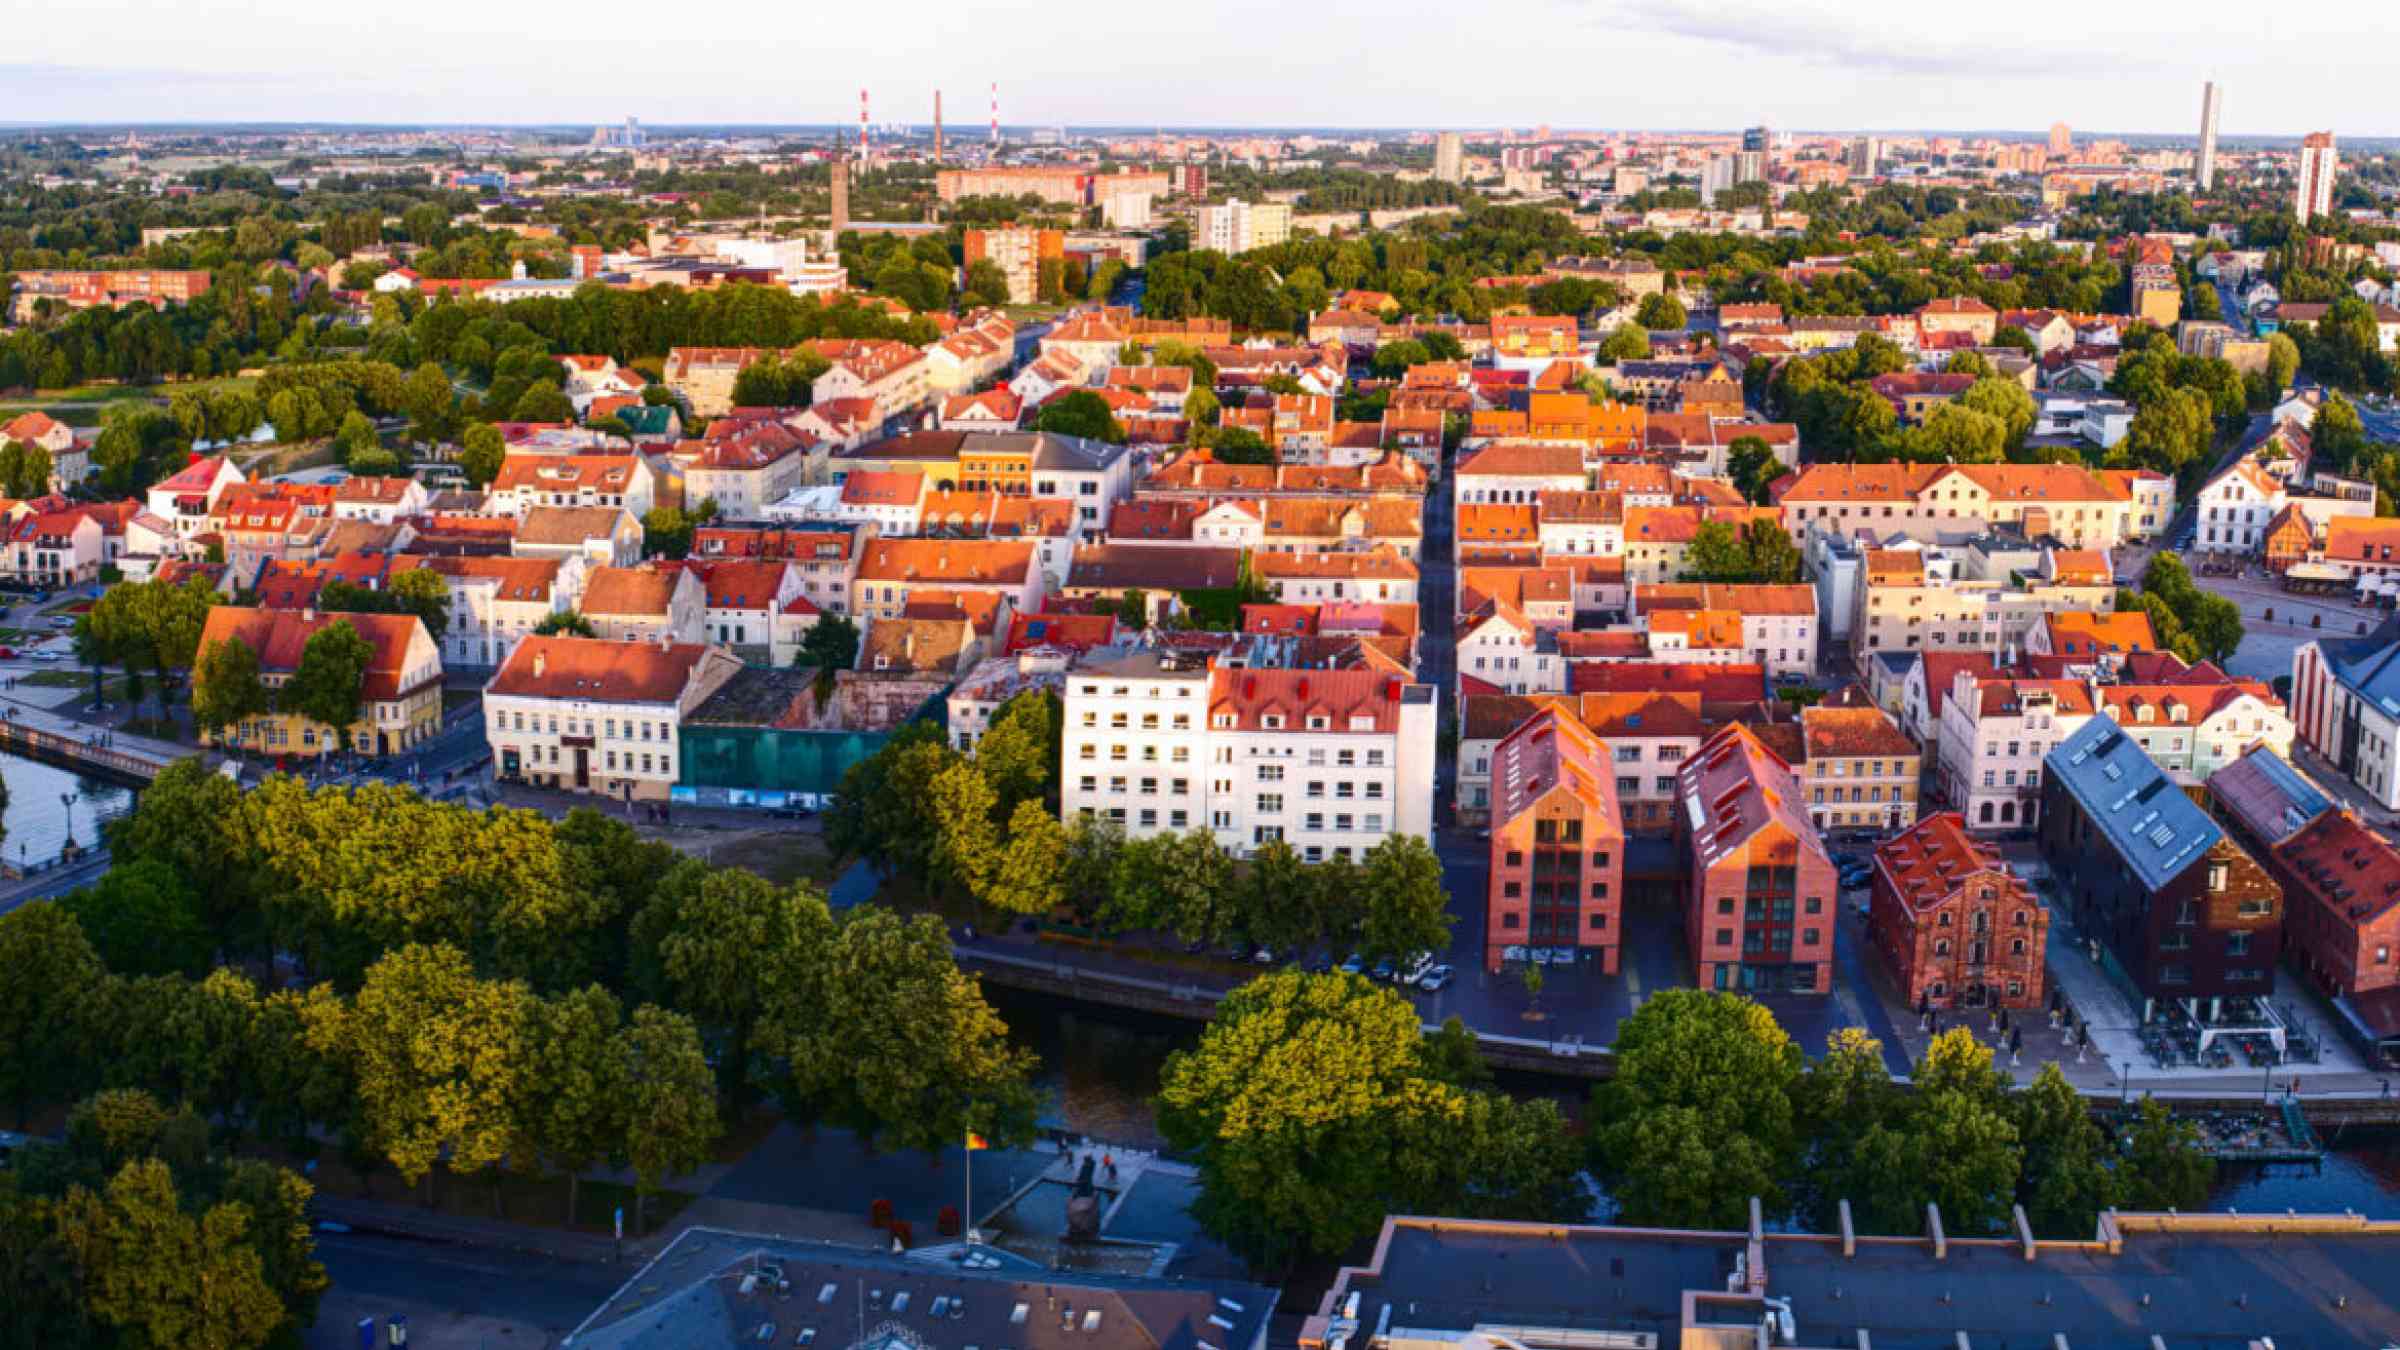 Aerial view of the Old town district